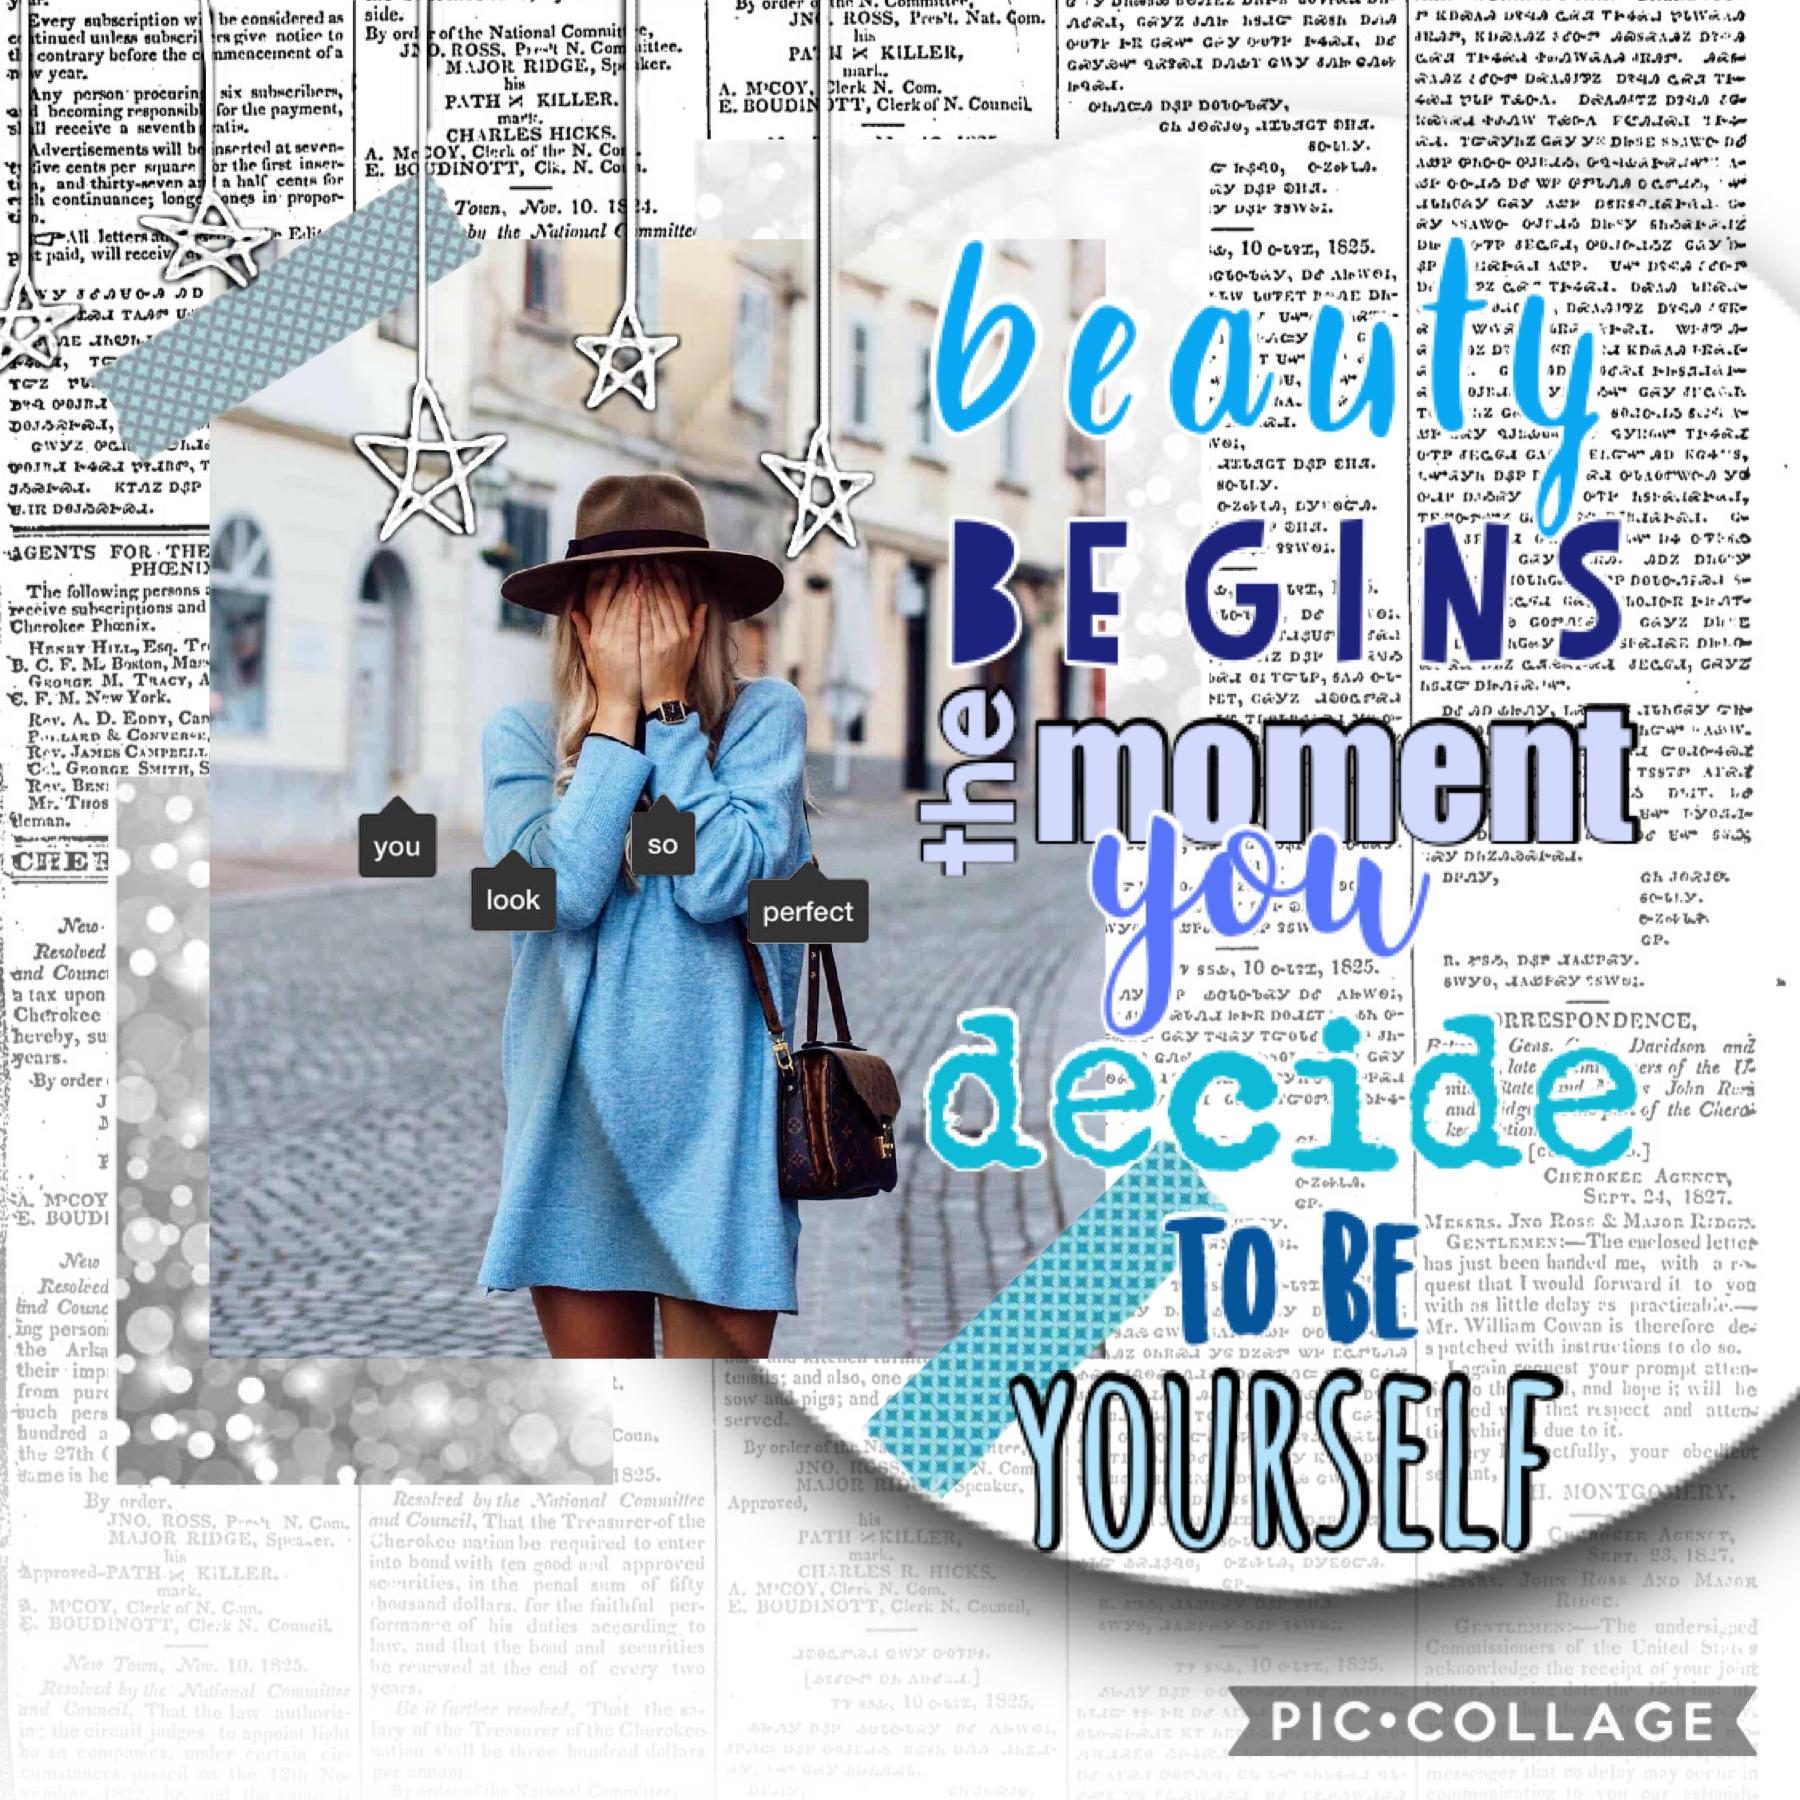 beauty begins the moment you decide to be yourself 💙